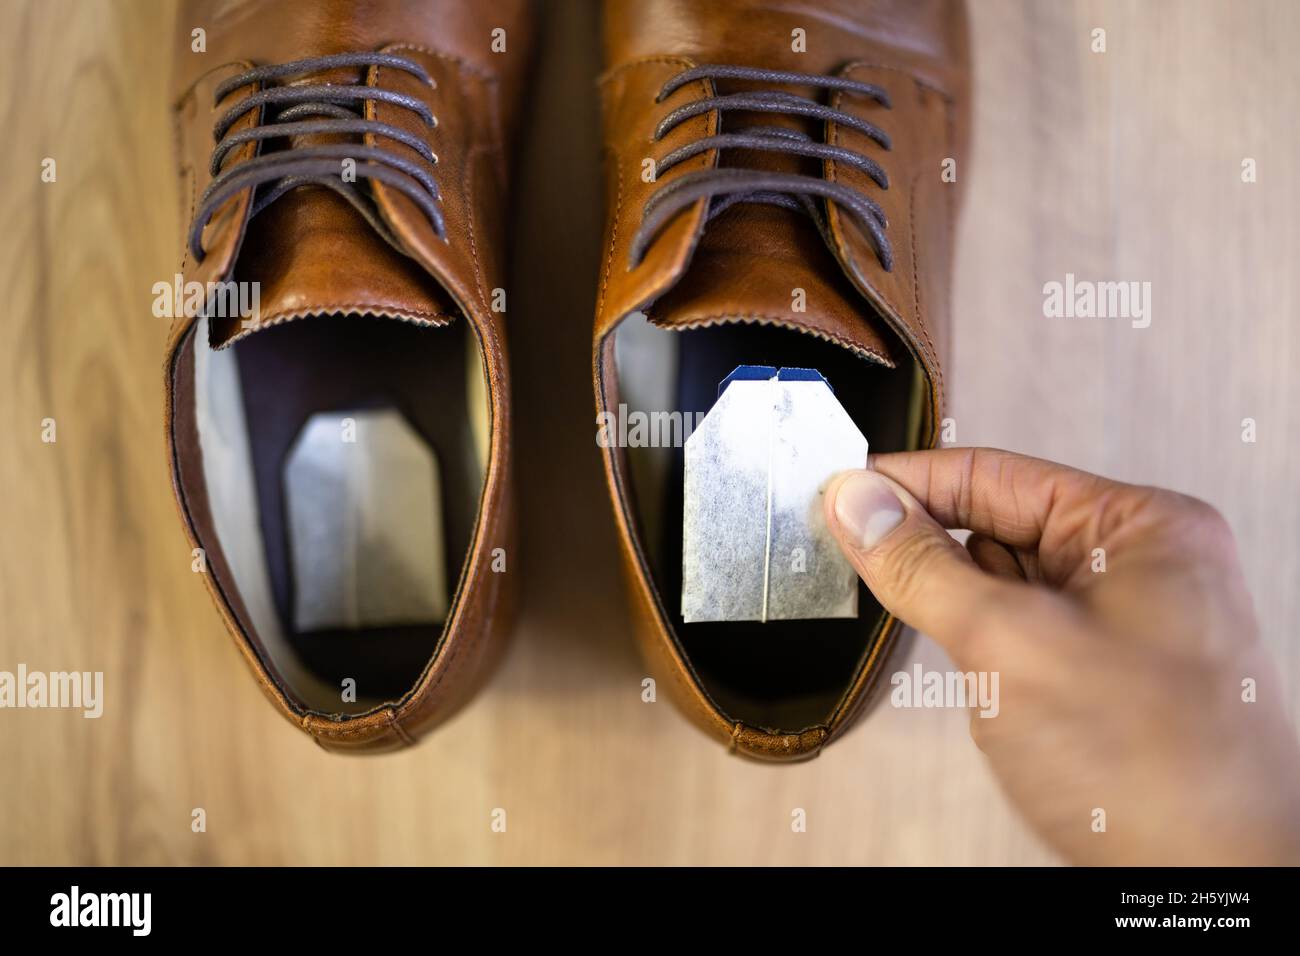 Tea Bag Aroma Life Hack For Smelly Shoes And Foot Odor Stock Photo - Alamy